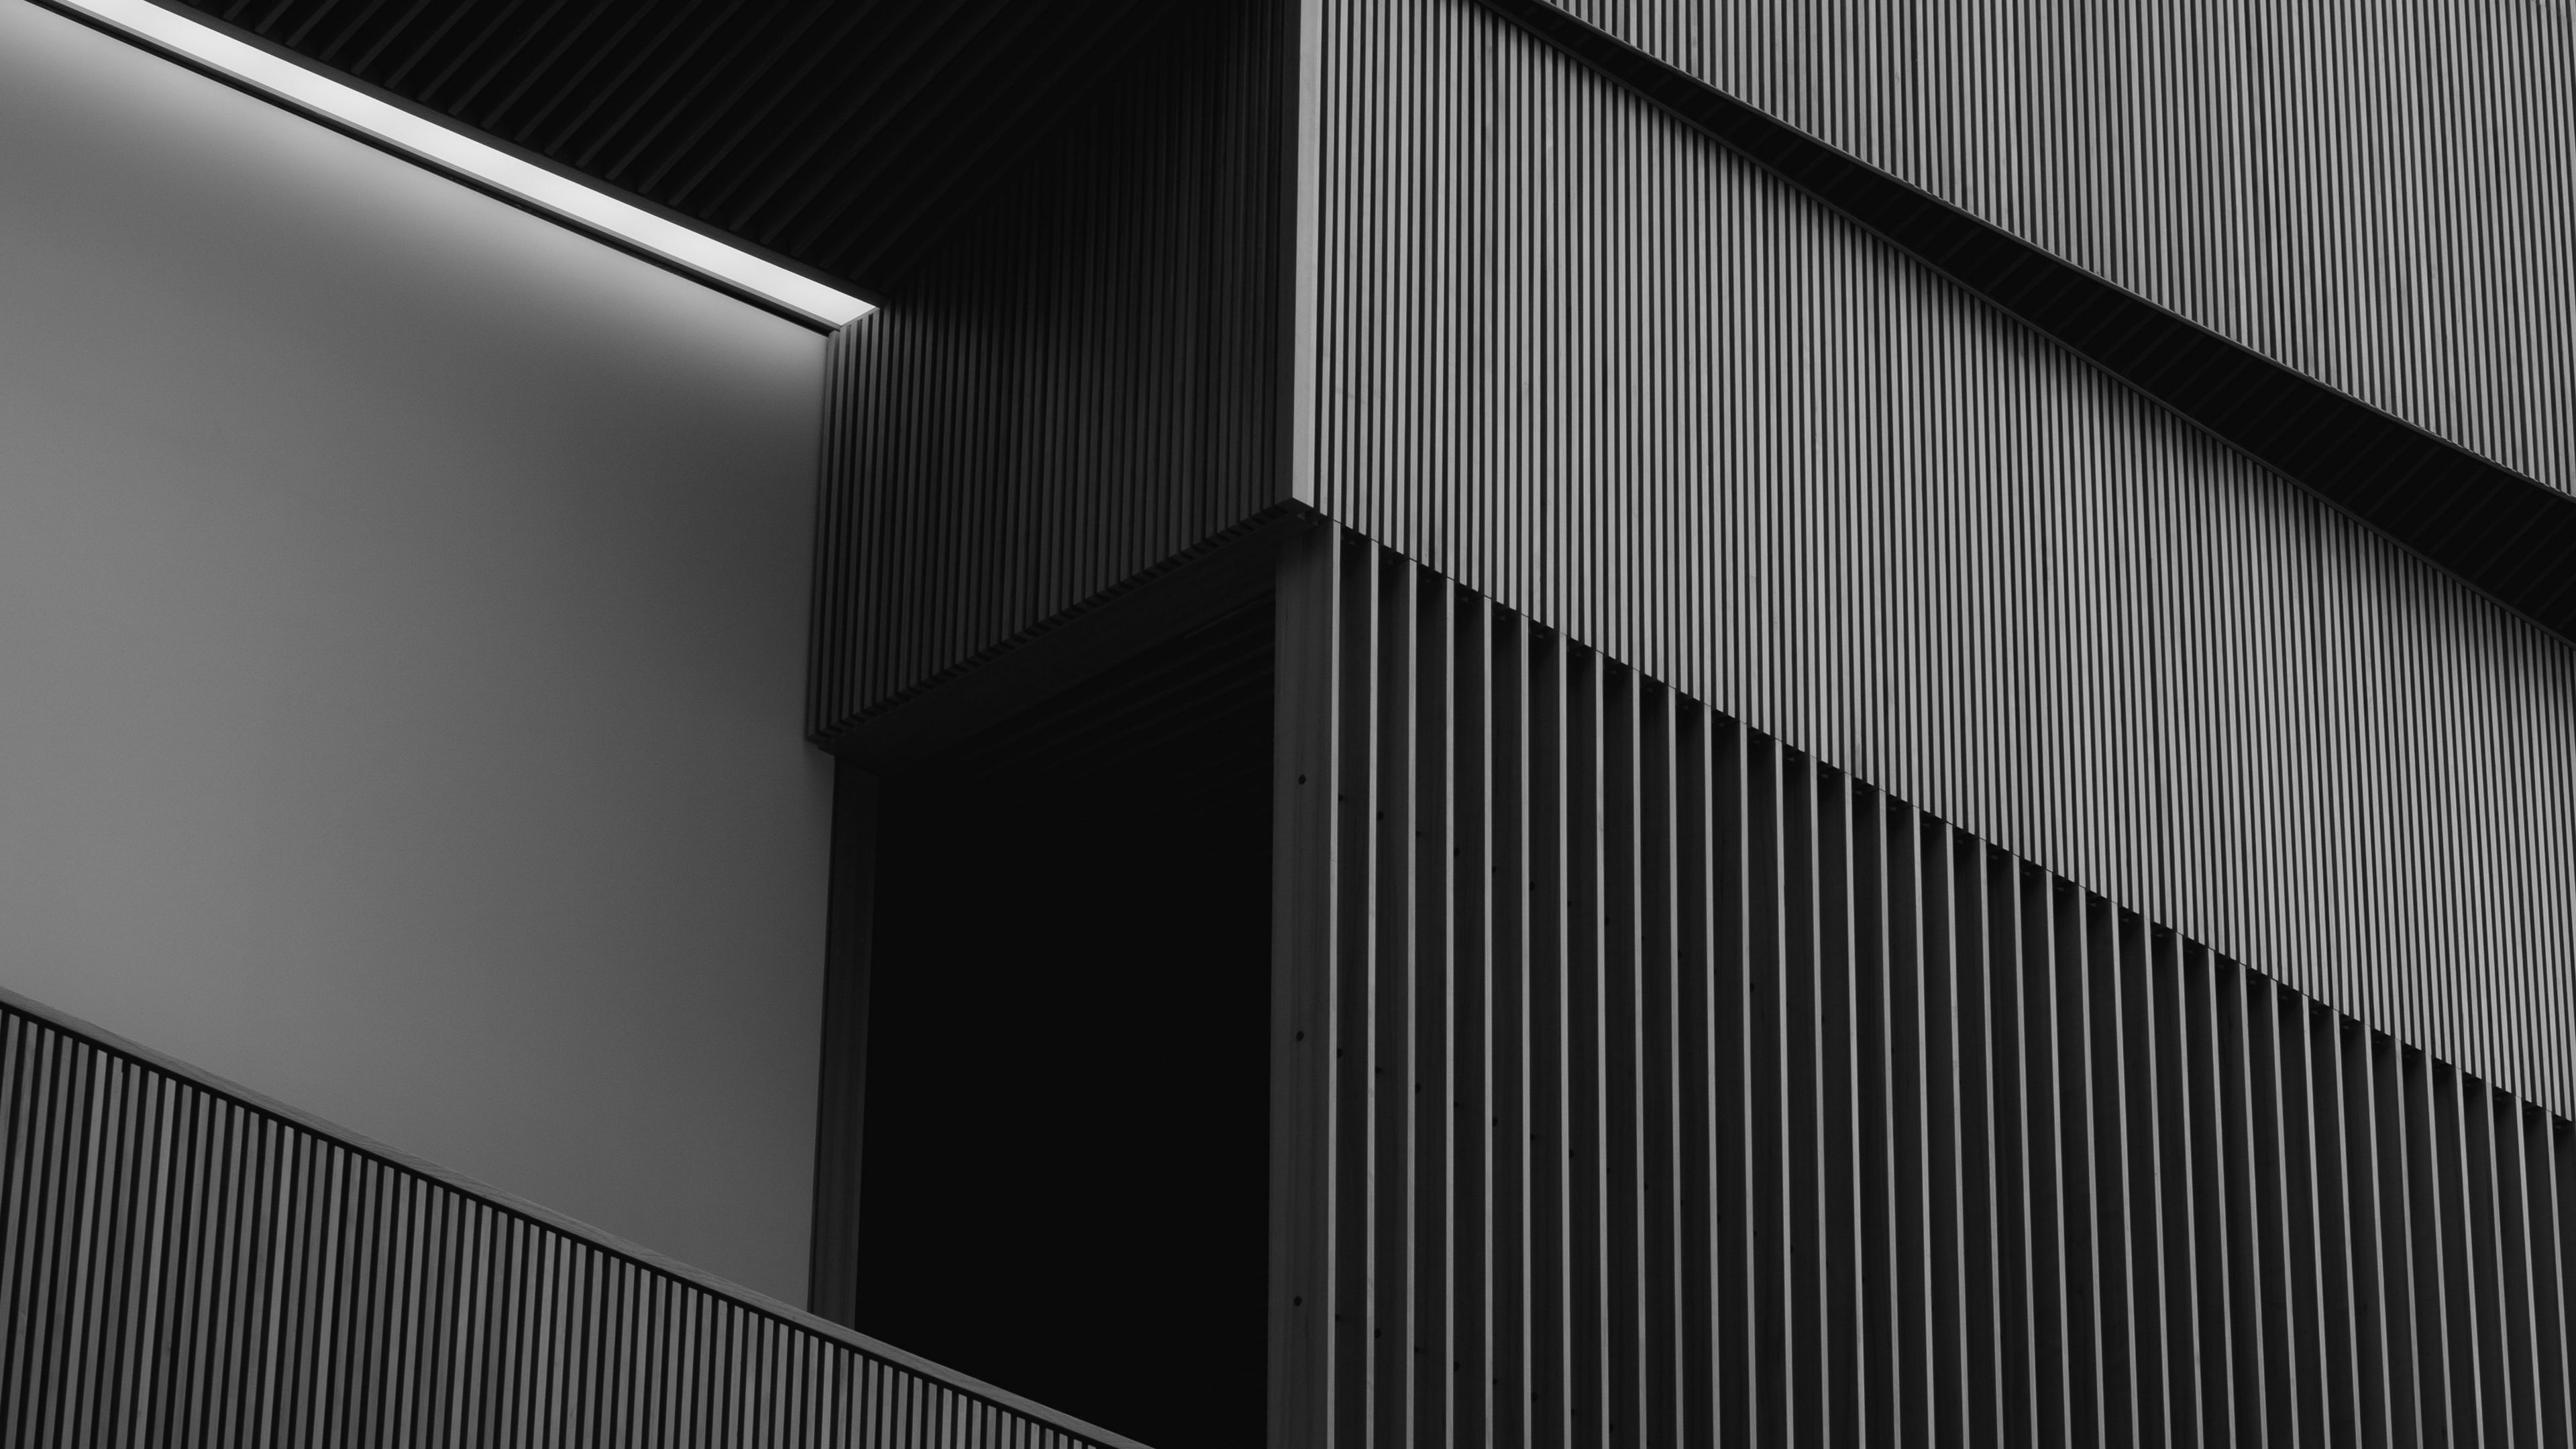 Download wallpaper 3840x2160 building, architecture, stripes, black and ...